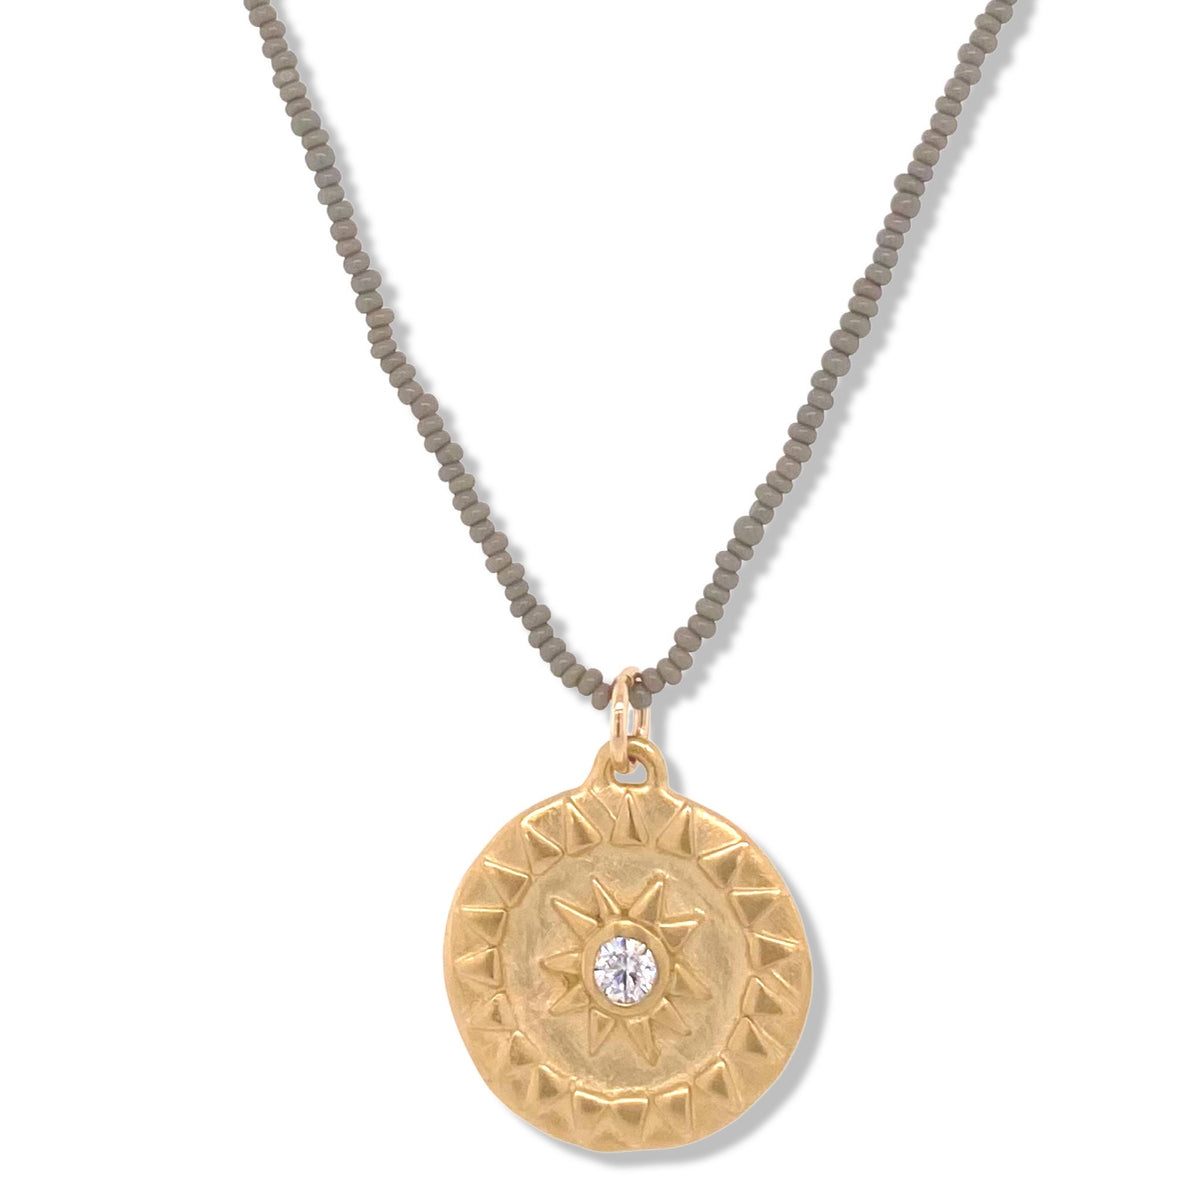 Sol Necklace in Gold on Charcoal beads | Keely Smith Jewelry | Nantucket